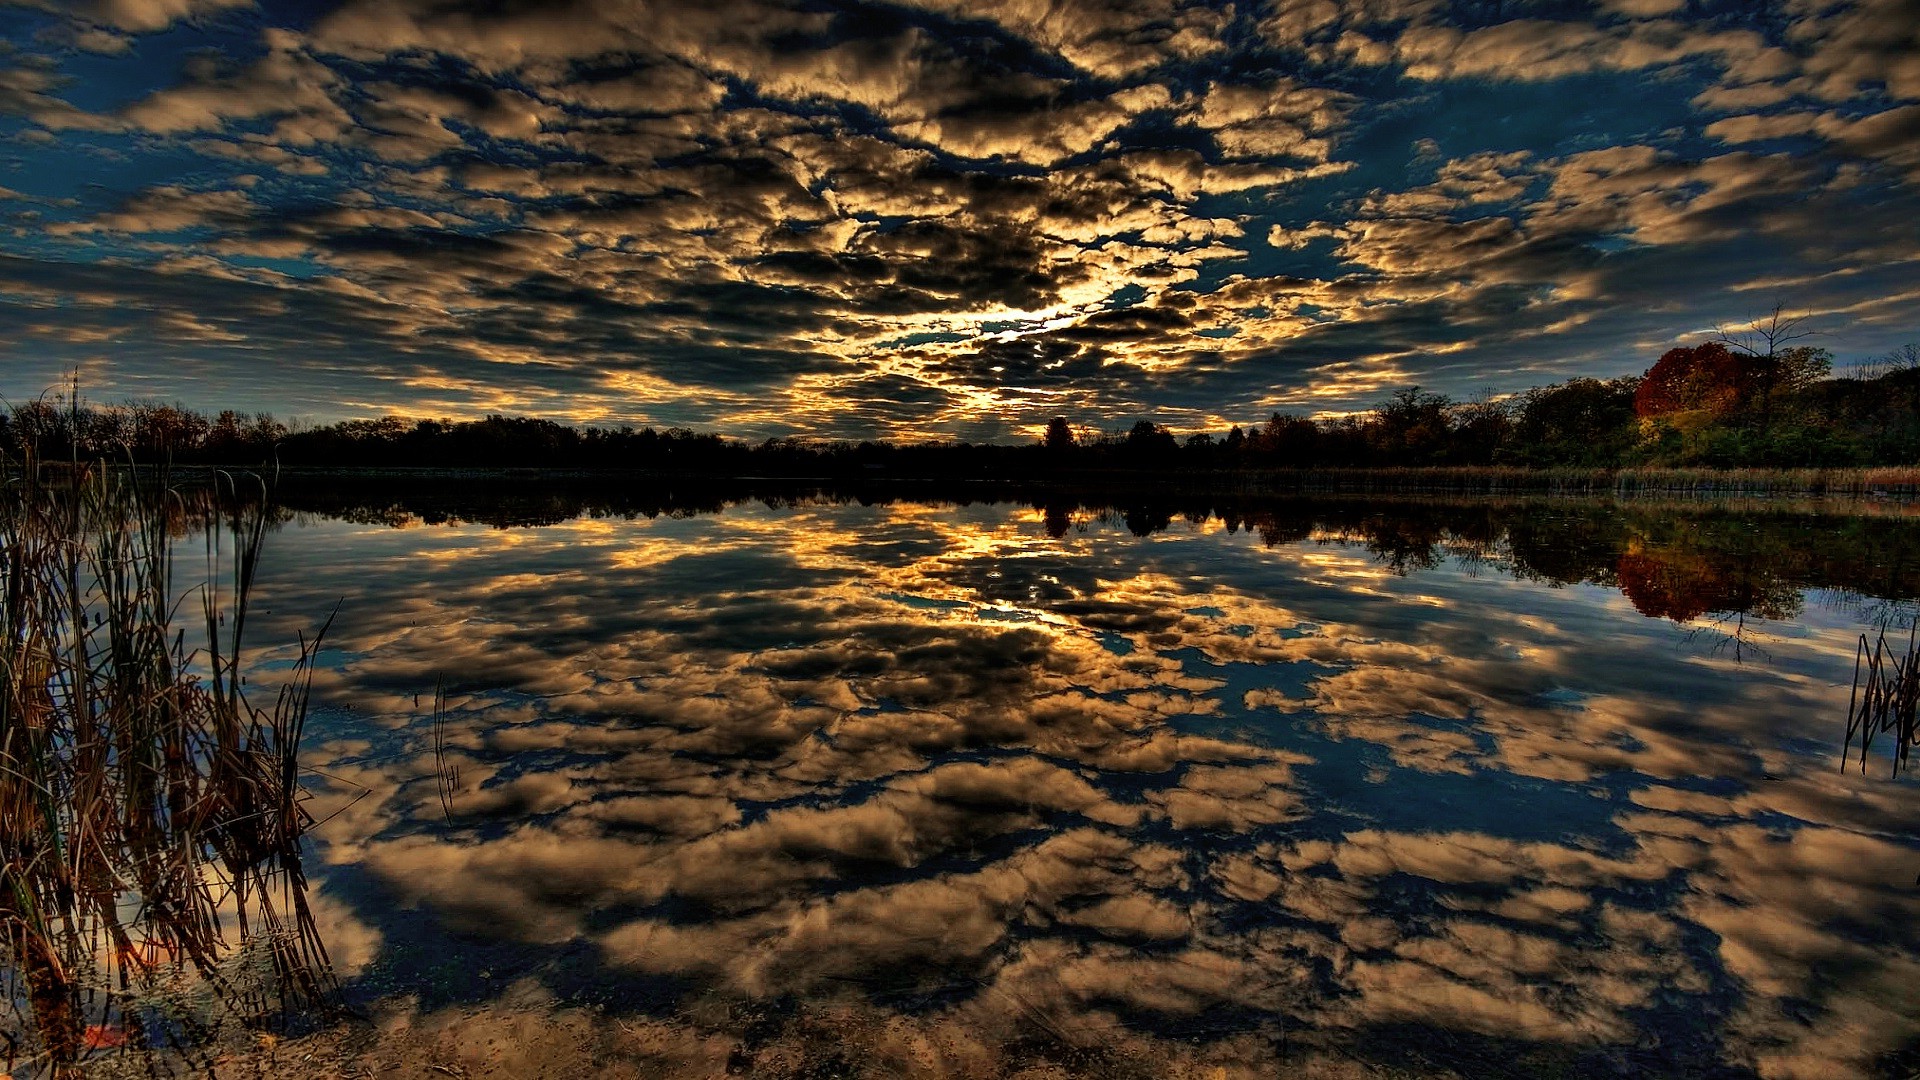 nature, Landscape, Sunset, Clouds, Trees, Water, Summer, Lake, Reflection, HDR Wallpaper